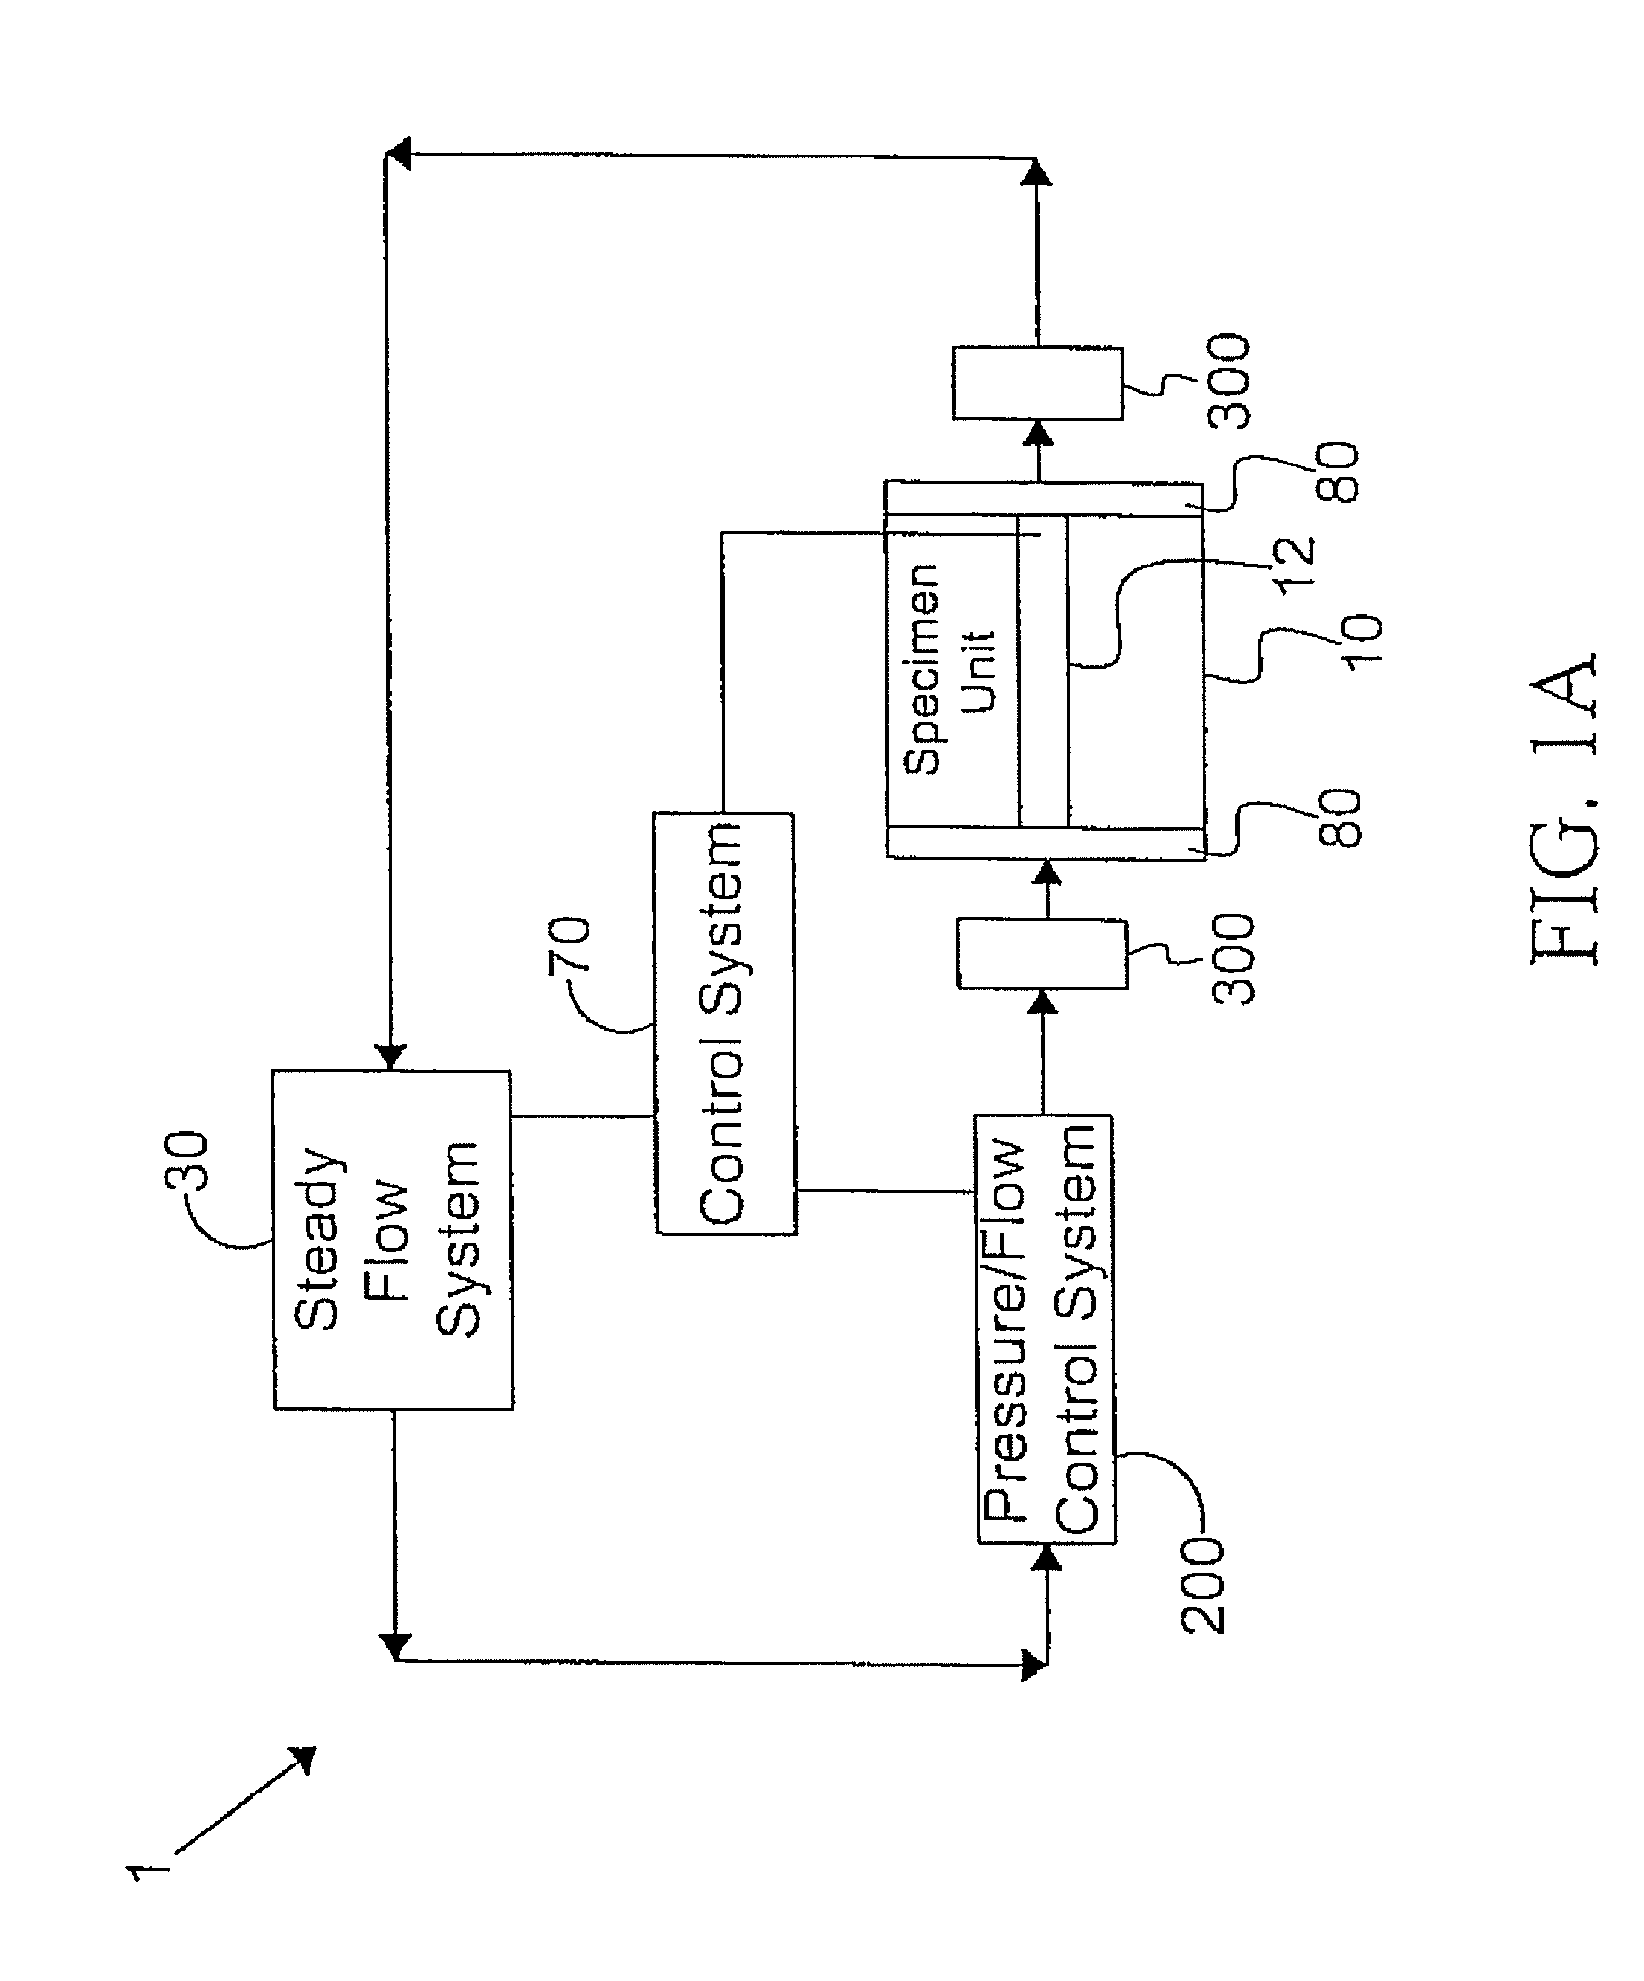 Method of conditioning a hybrid synthetic tubular structure to yield a functional human hybrid hemodialysis access graft